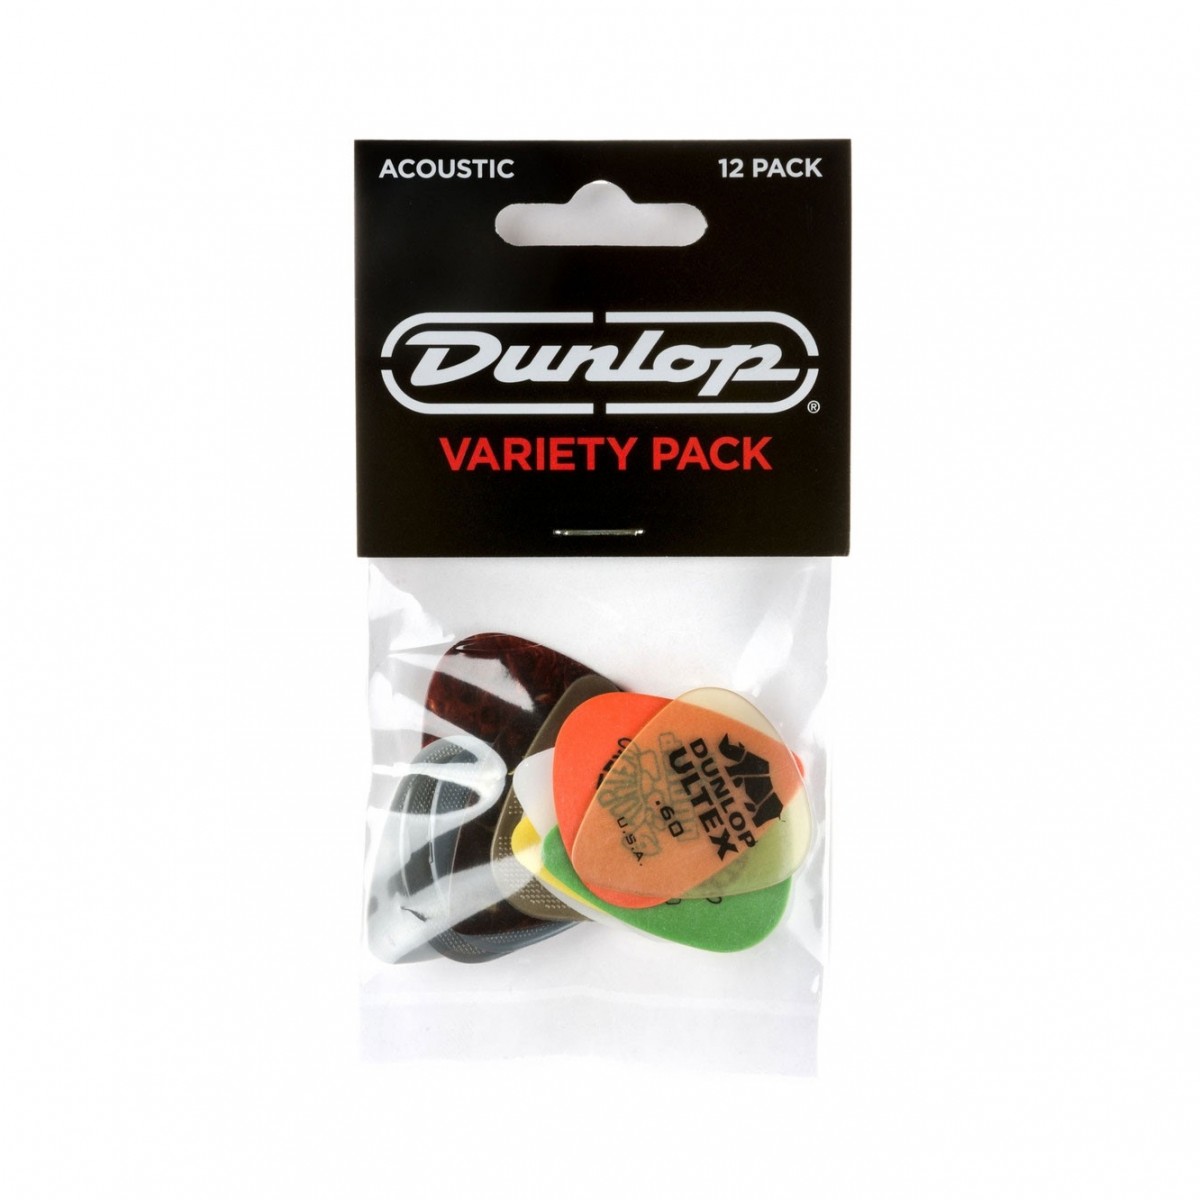 Dunlop Variety Pack PVP112 Acoustic